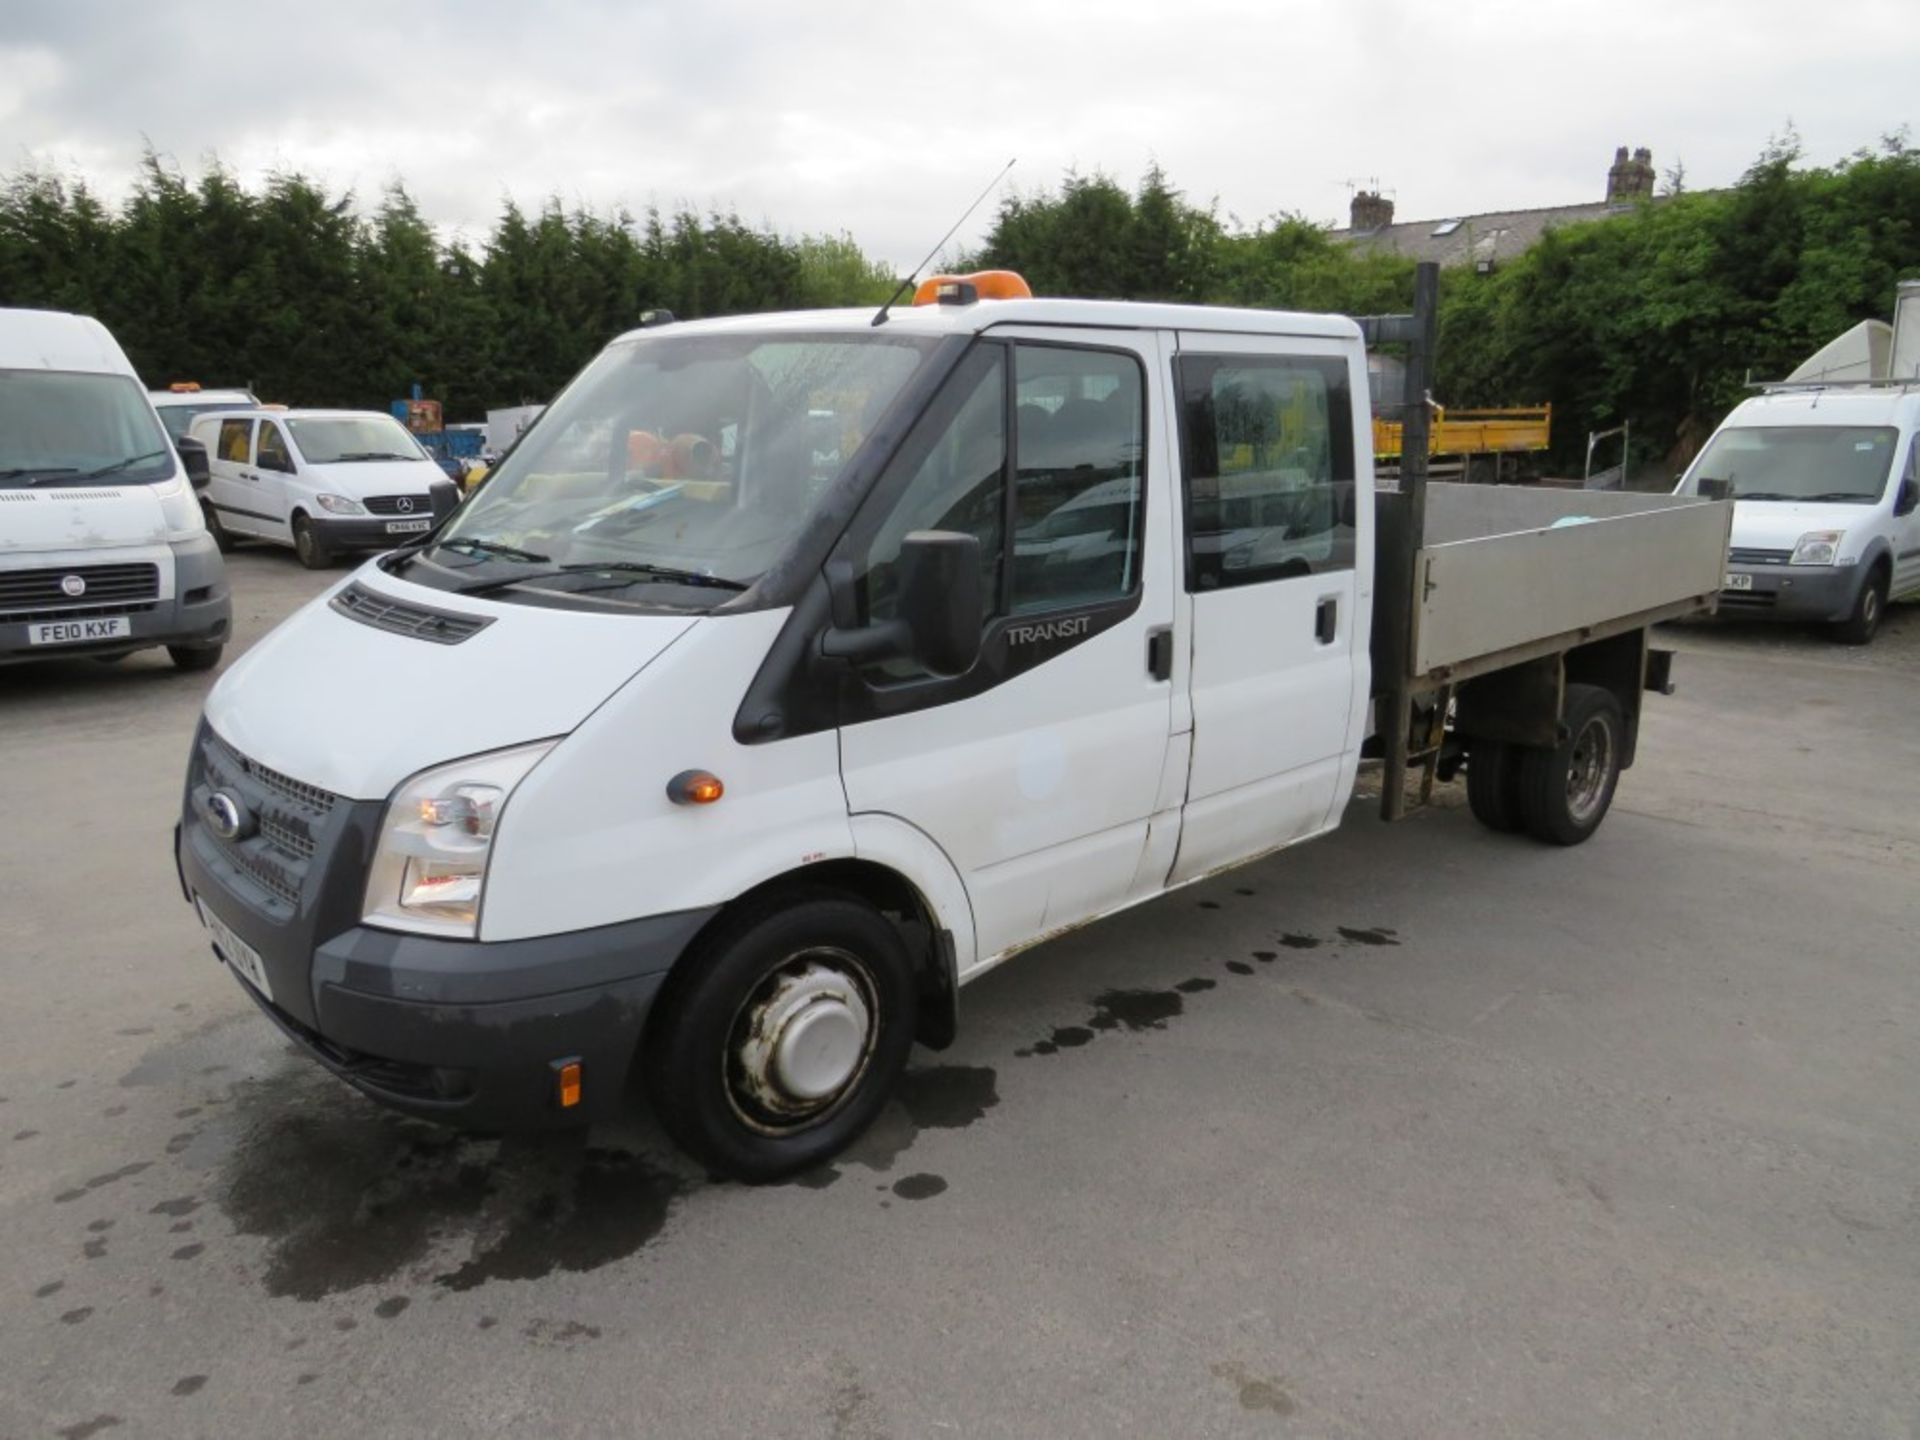 12 reg FORD TRANSIT 100 T350 DOUBLE CAB TIPPER (DIRECT COUNCIL) 1ST REG 08/12, TEST 07/20, 40846M, - Image 2 of 6